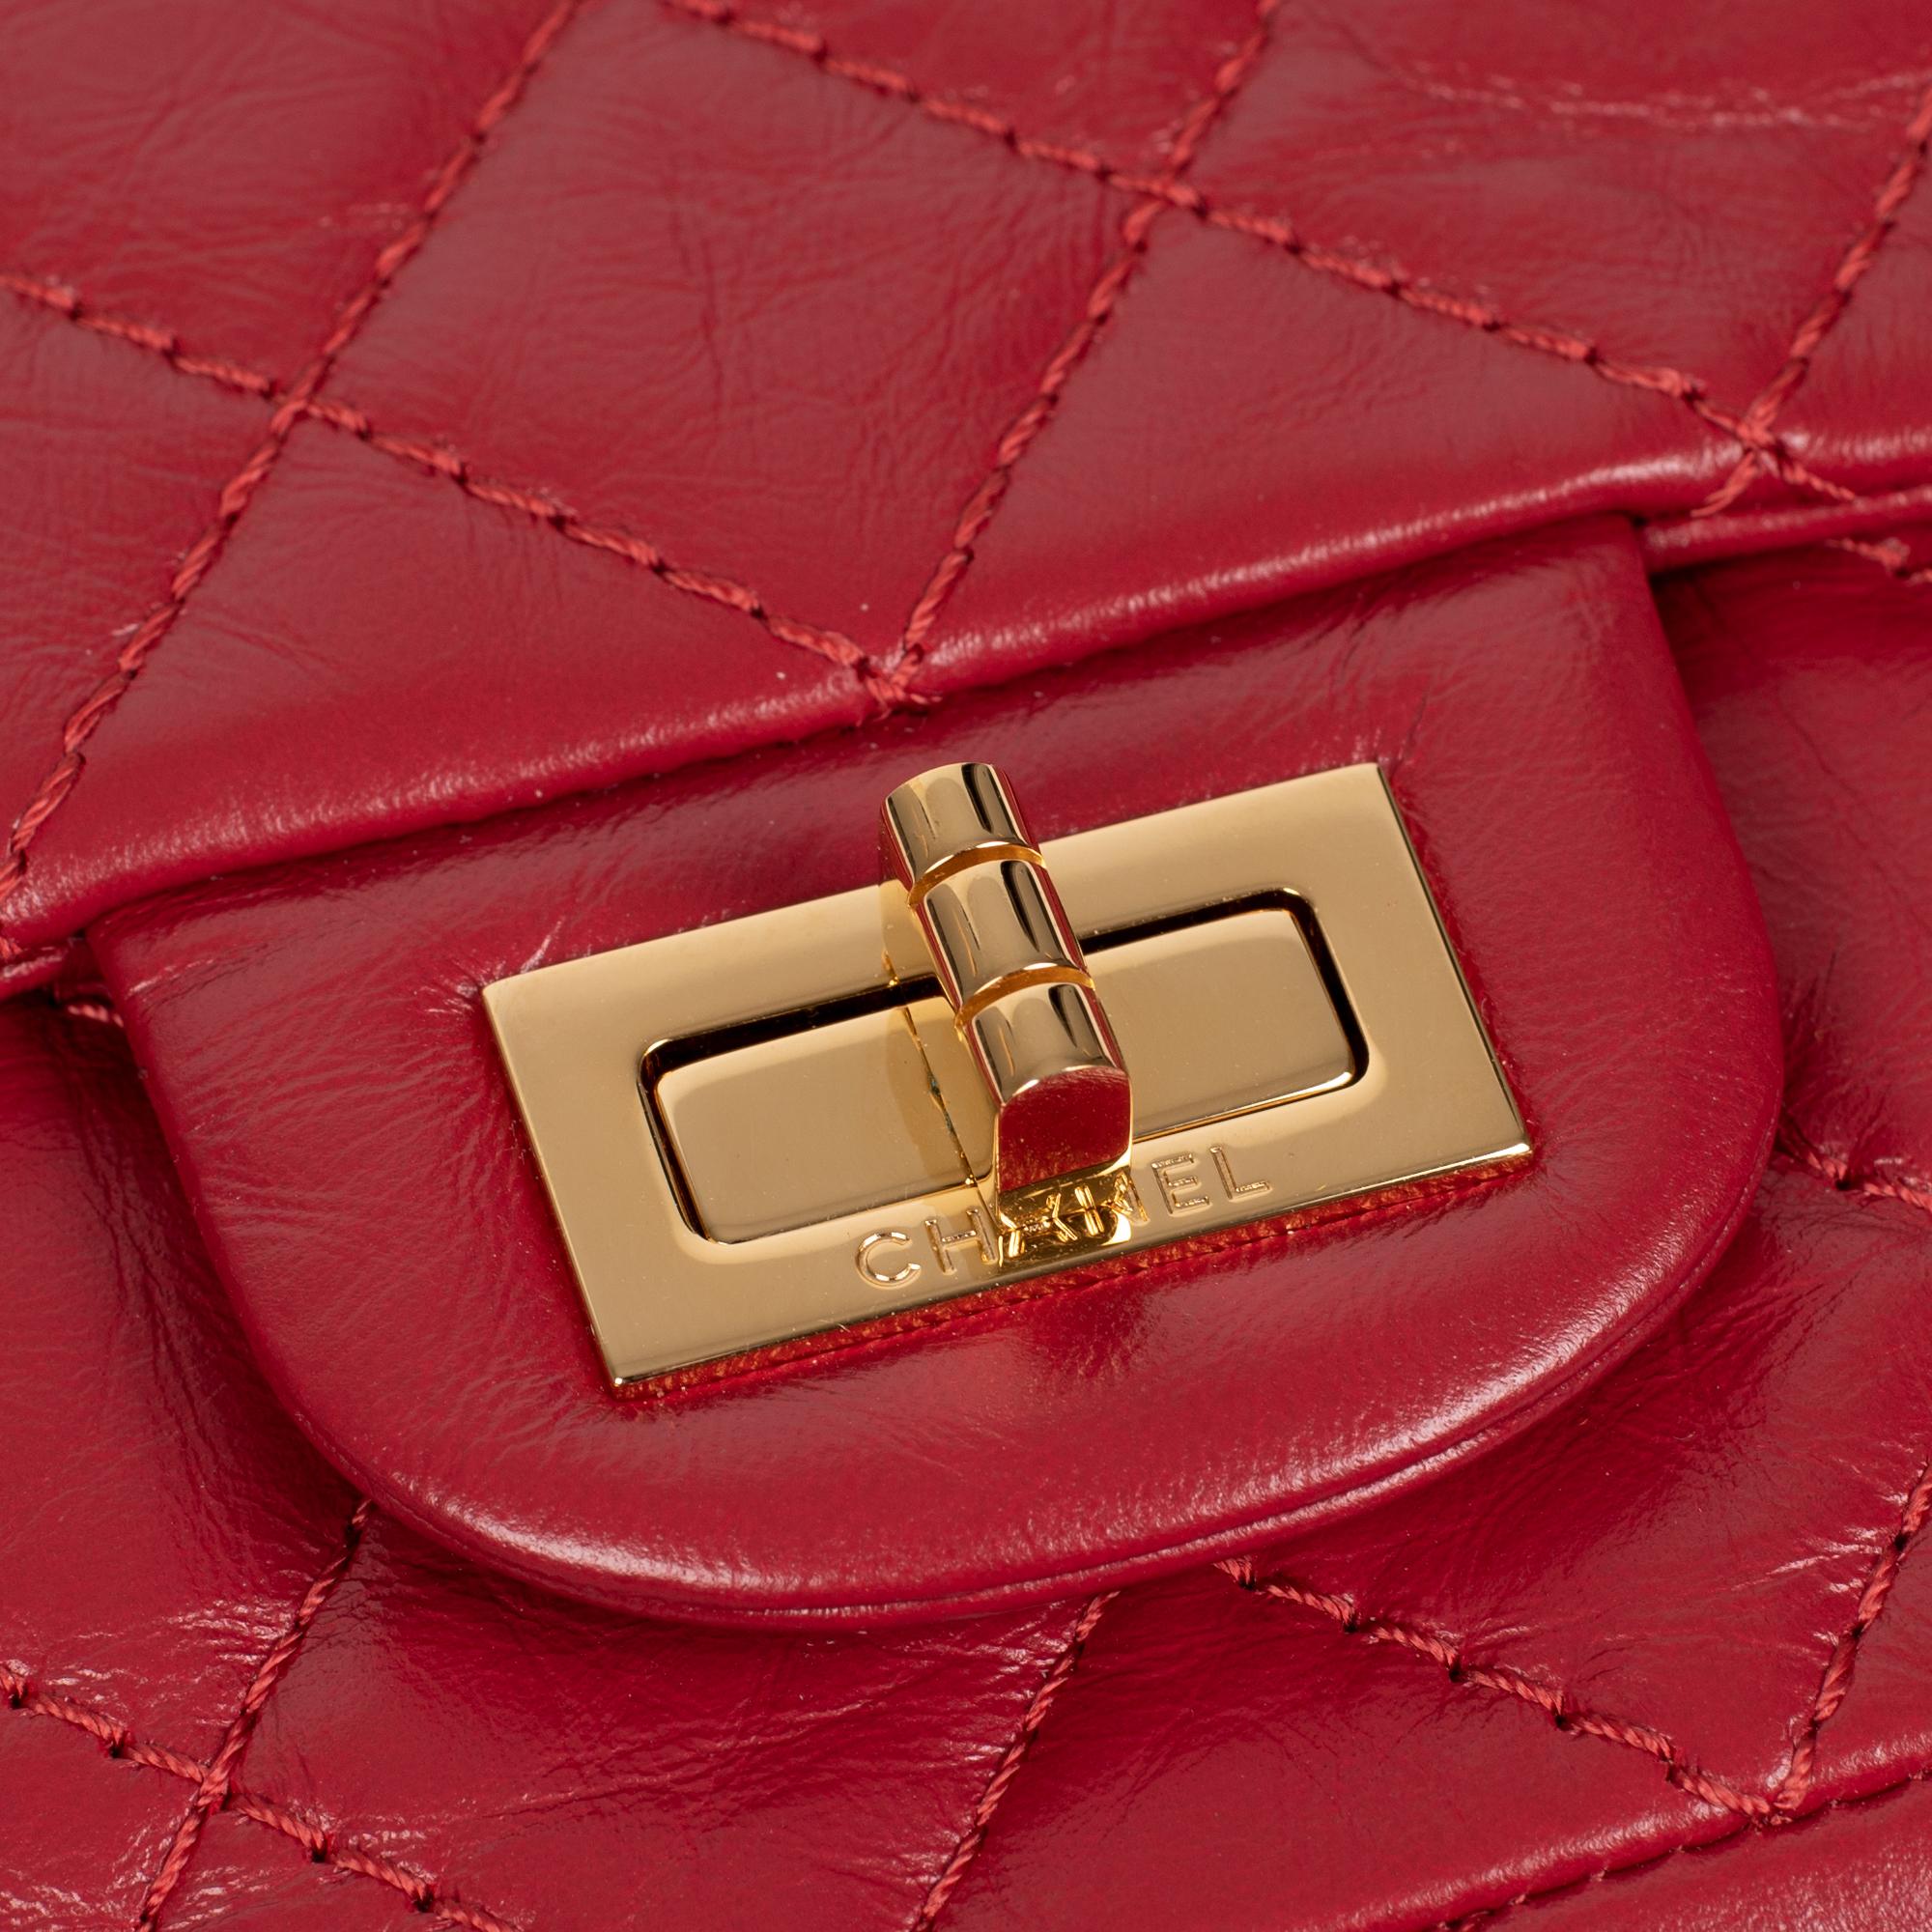 Rare Mini Chanel 2.55 Reissue handbag in red quilted leather, gold hardware 2